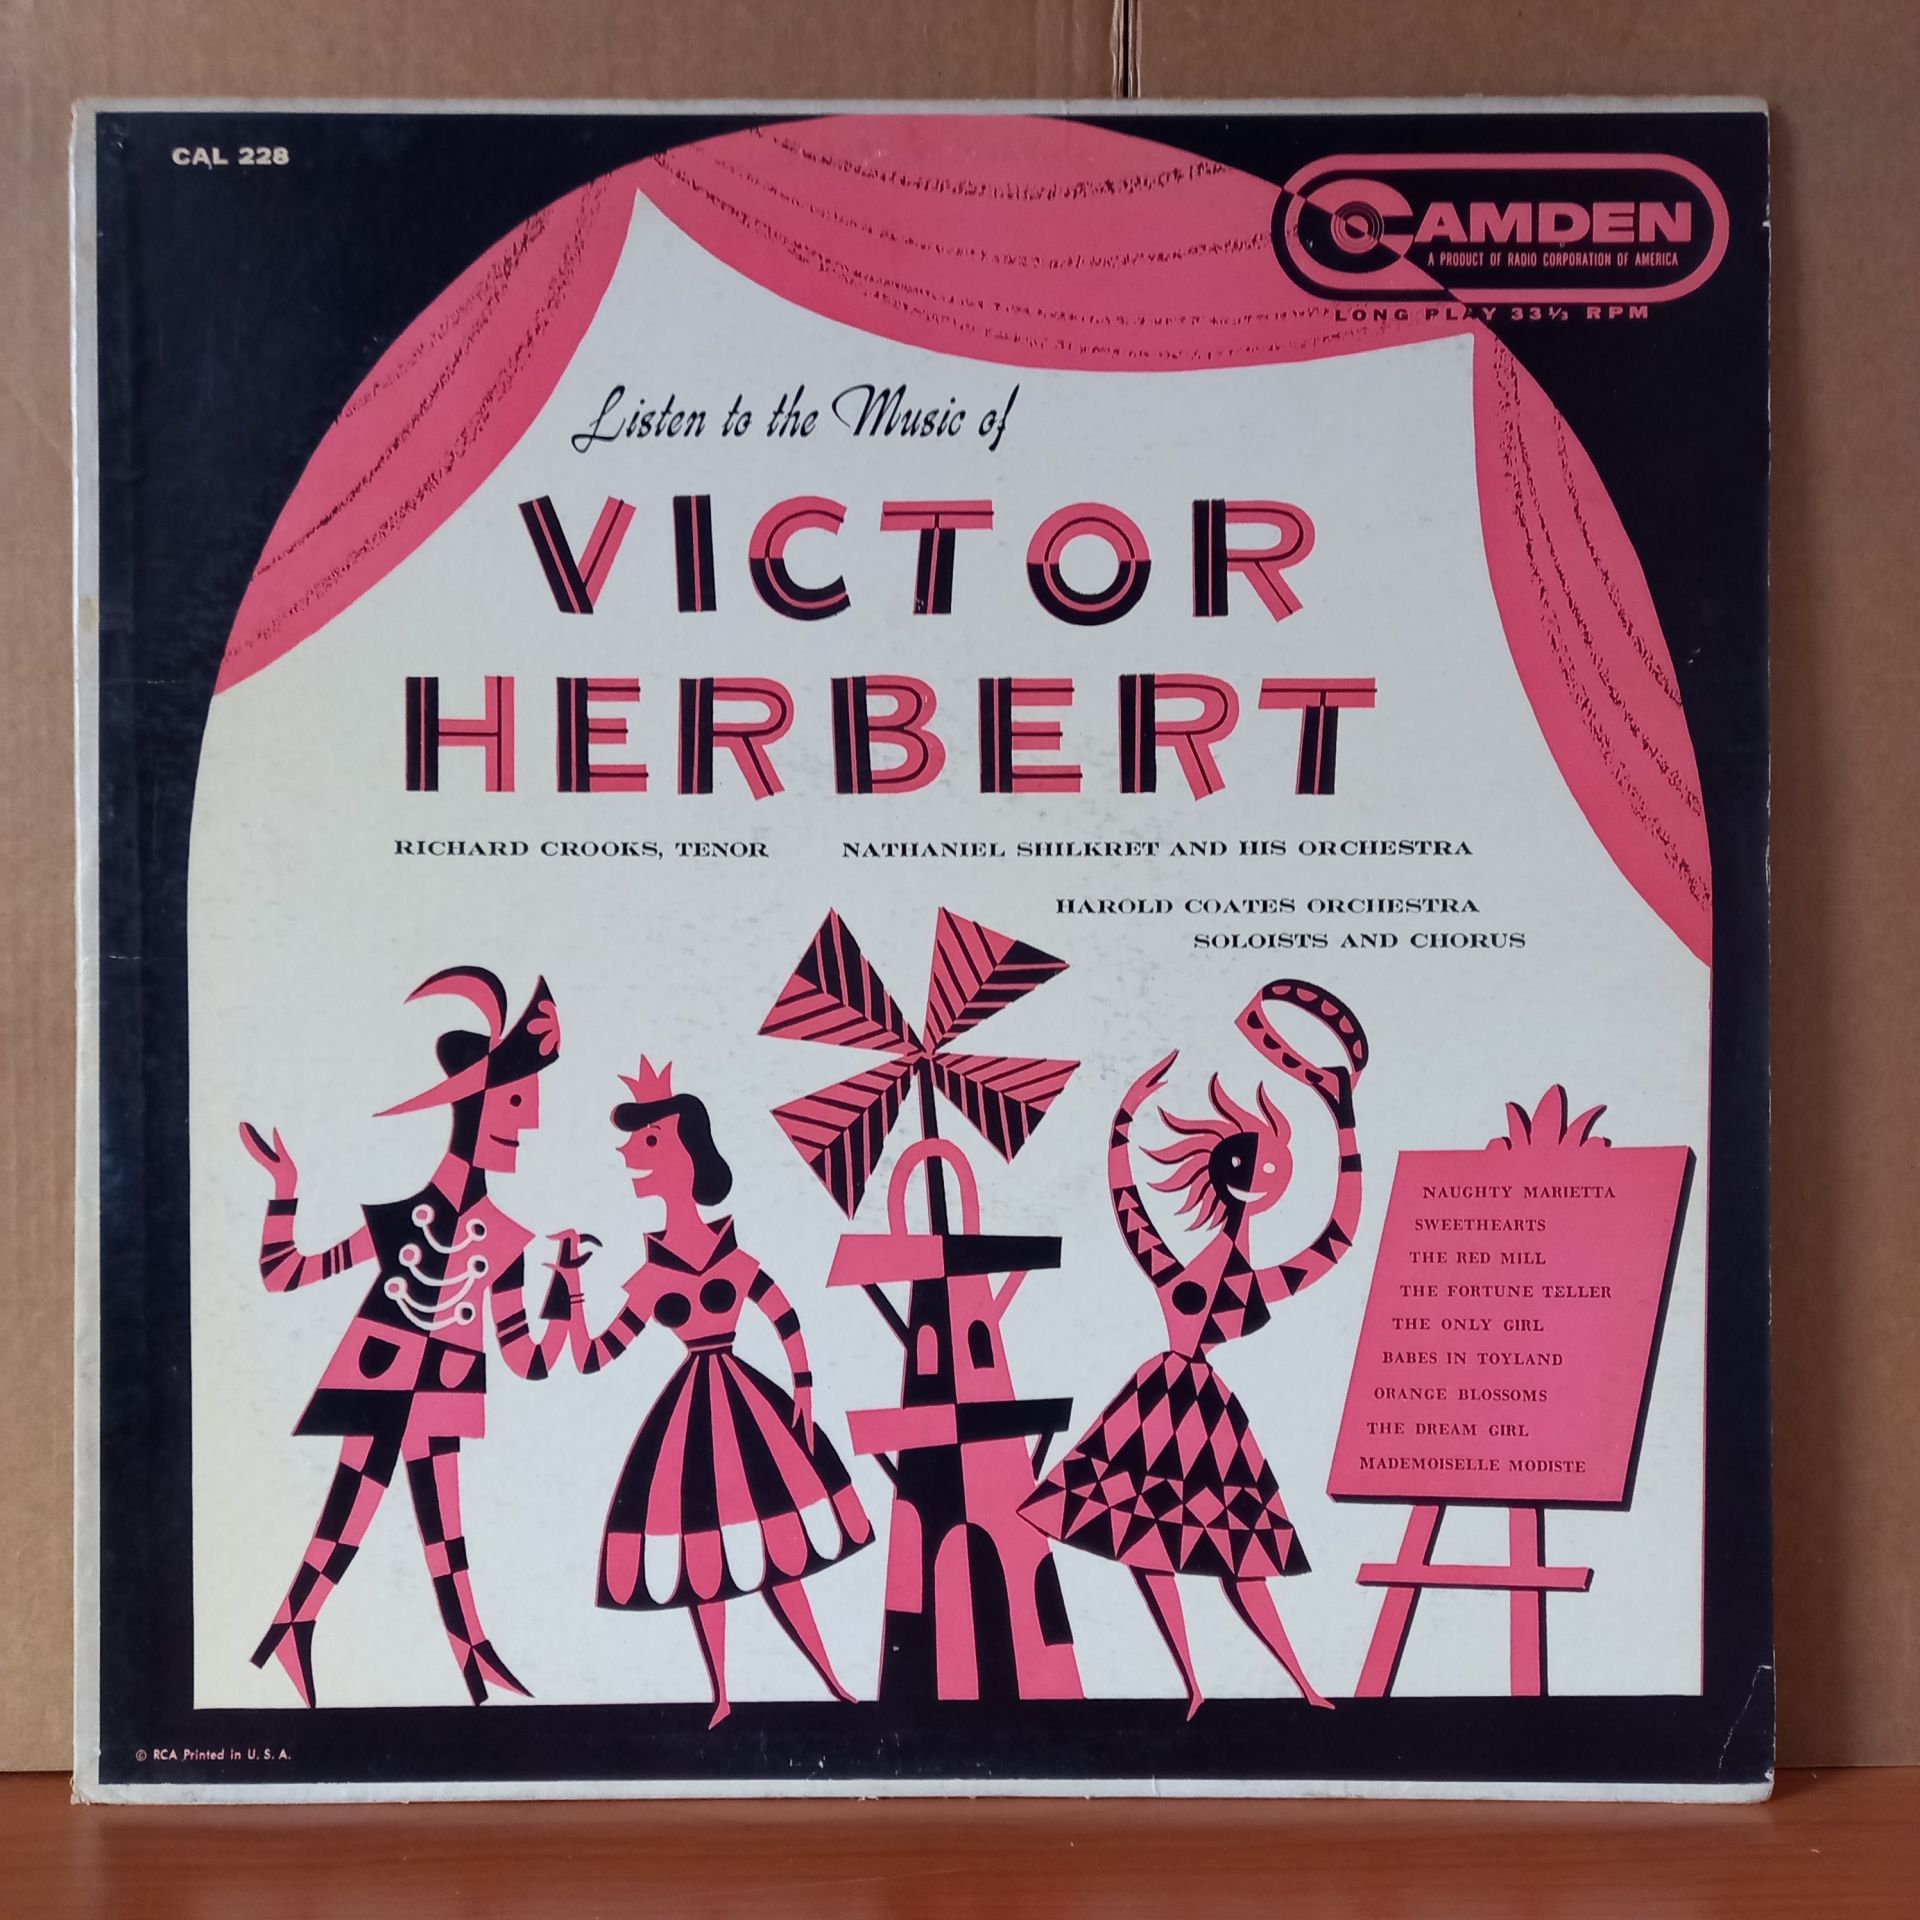 THE MUSIC OF VICTOR HERBERT / RICHARD CROOKS, NATHANIEL SHILKRET AND HIS ORCHESTRA, AL GOODMAN AND HIS ORCHESTRA AND CHORUS (1956) - LP 2.EL PLAK